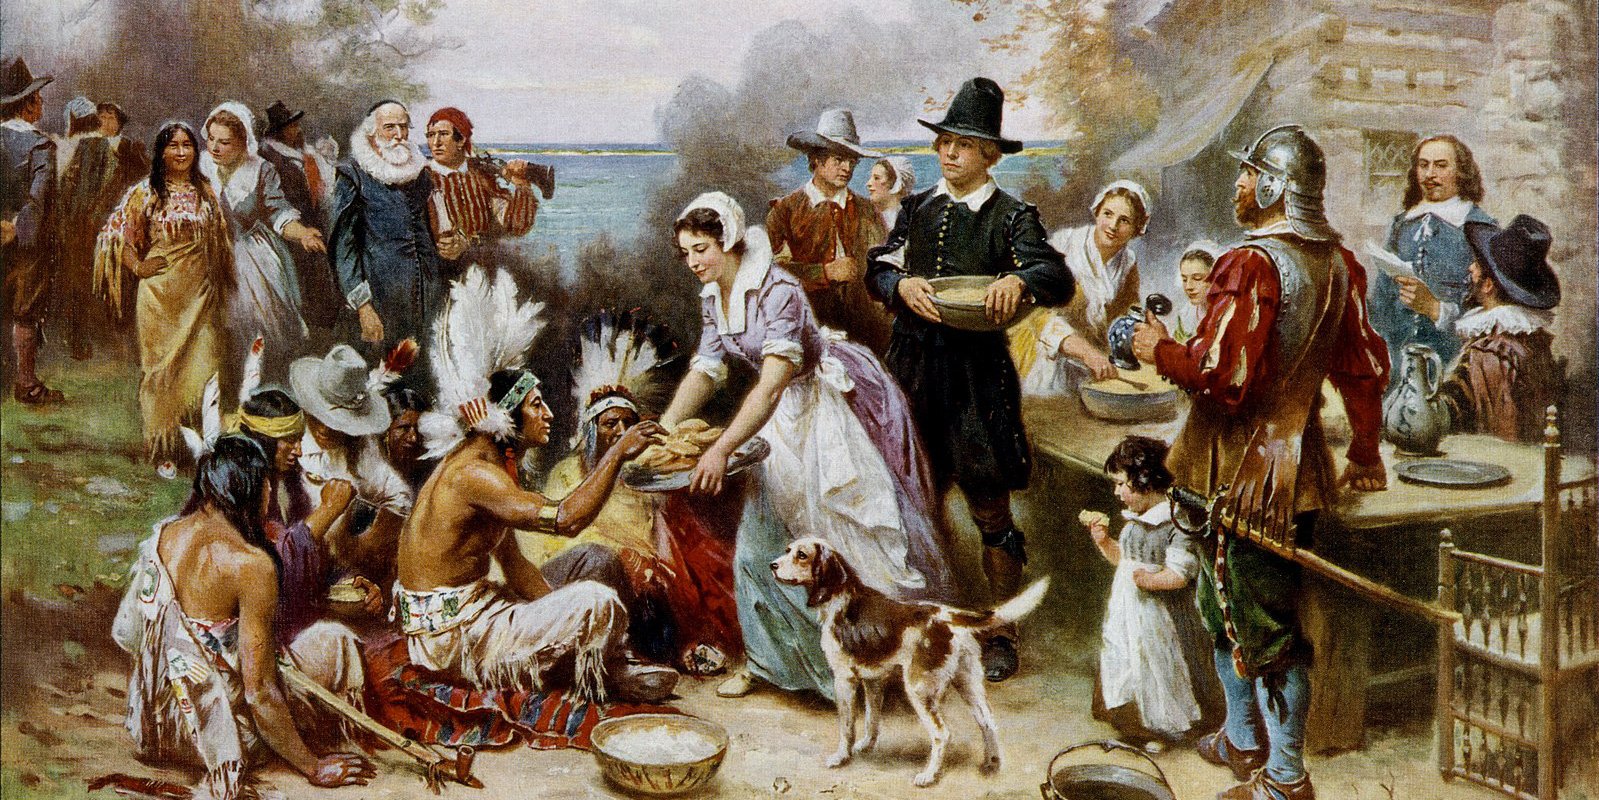 The First Thanksgiving 1621, oil on canvas by Jean Leon Gerome Ferris - This image is available from the United States Library of Congress's Prints and Photographs division under the digital ID cph.3g04961.